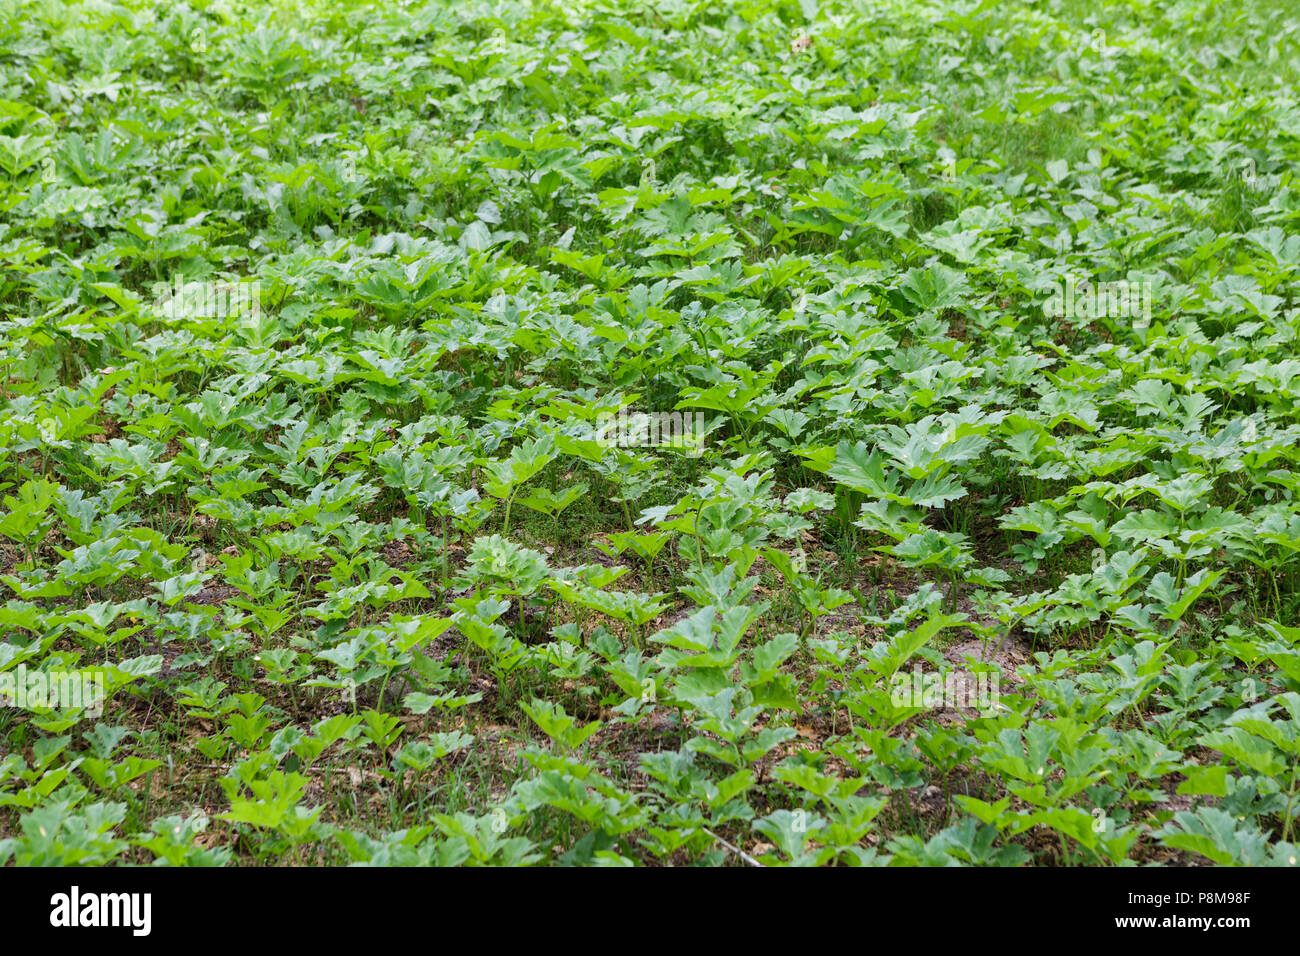 Field of young green giant hoghweed. This dangerous invasive plants can cause serious skin burns, even death in extreme cases. Stock Photo